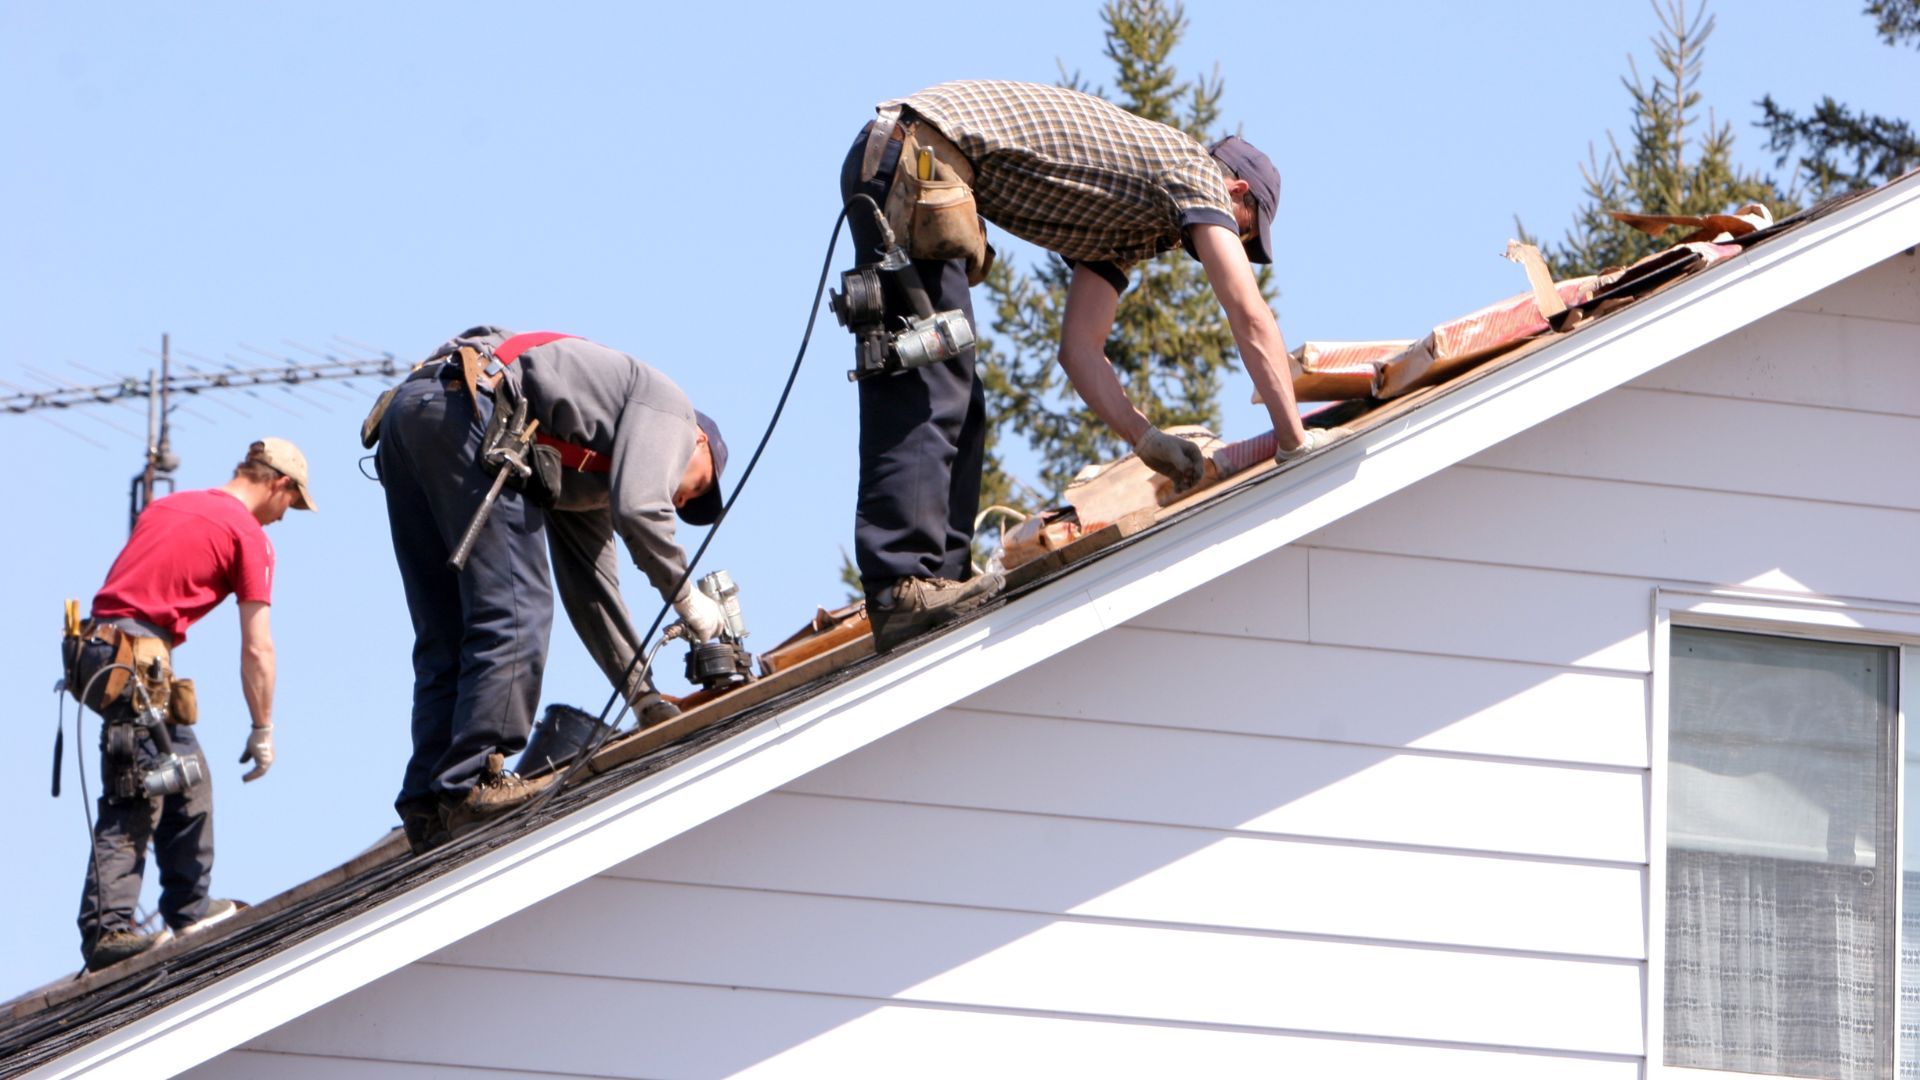 What Are the Key Benefits of Choosing a Local Roofing Company?